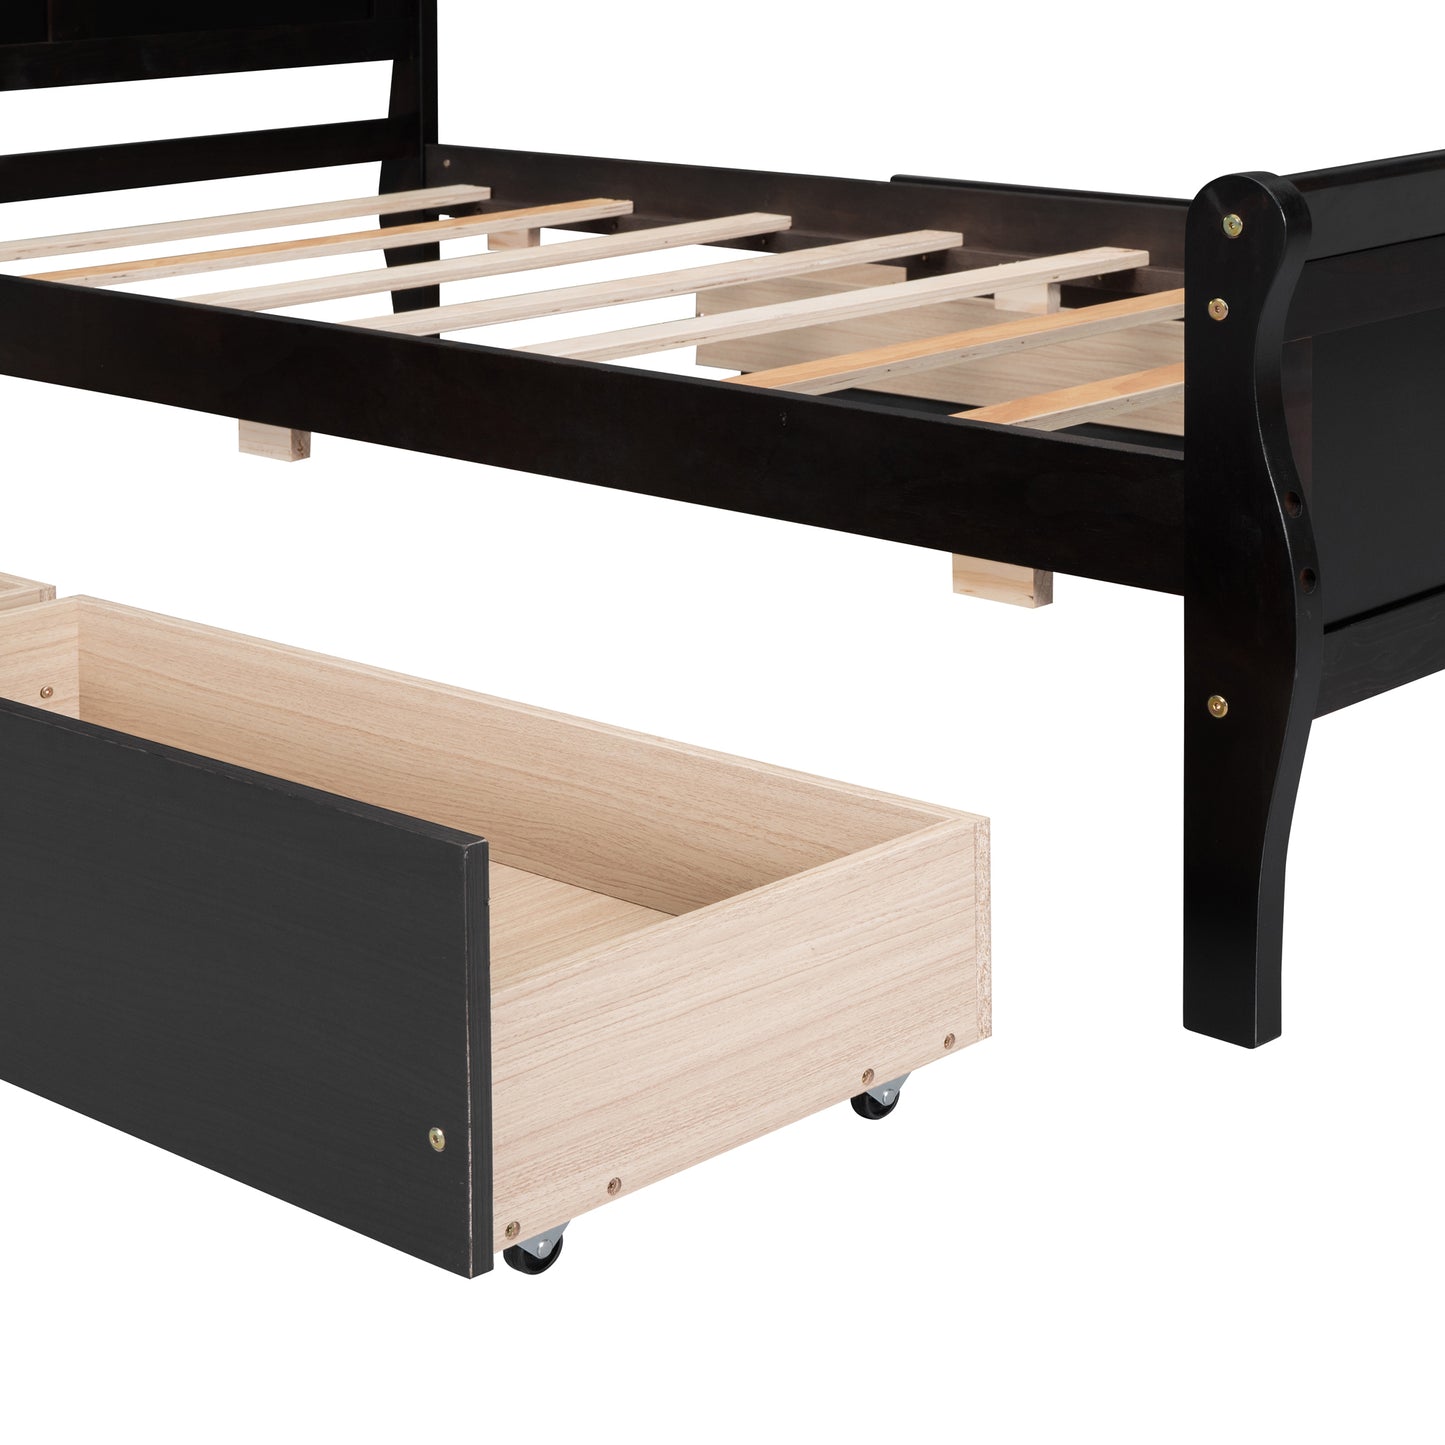 Twin Size Wood Platform Bed with 4 Drawers and Streamlined Headboard & Footboard, Espresso